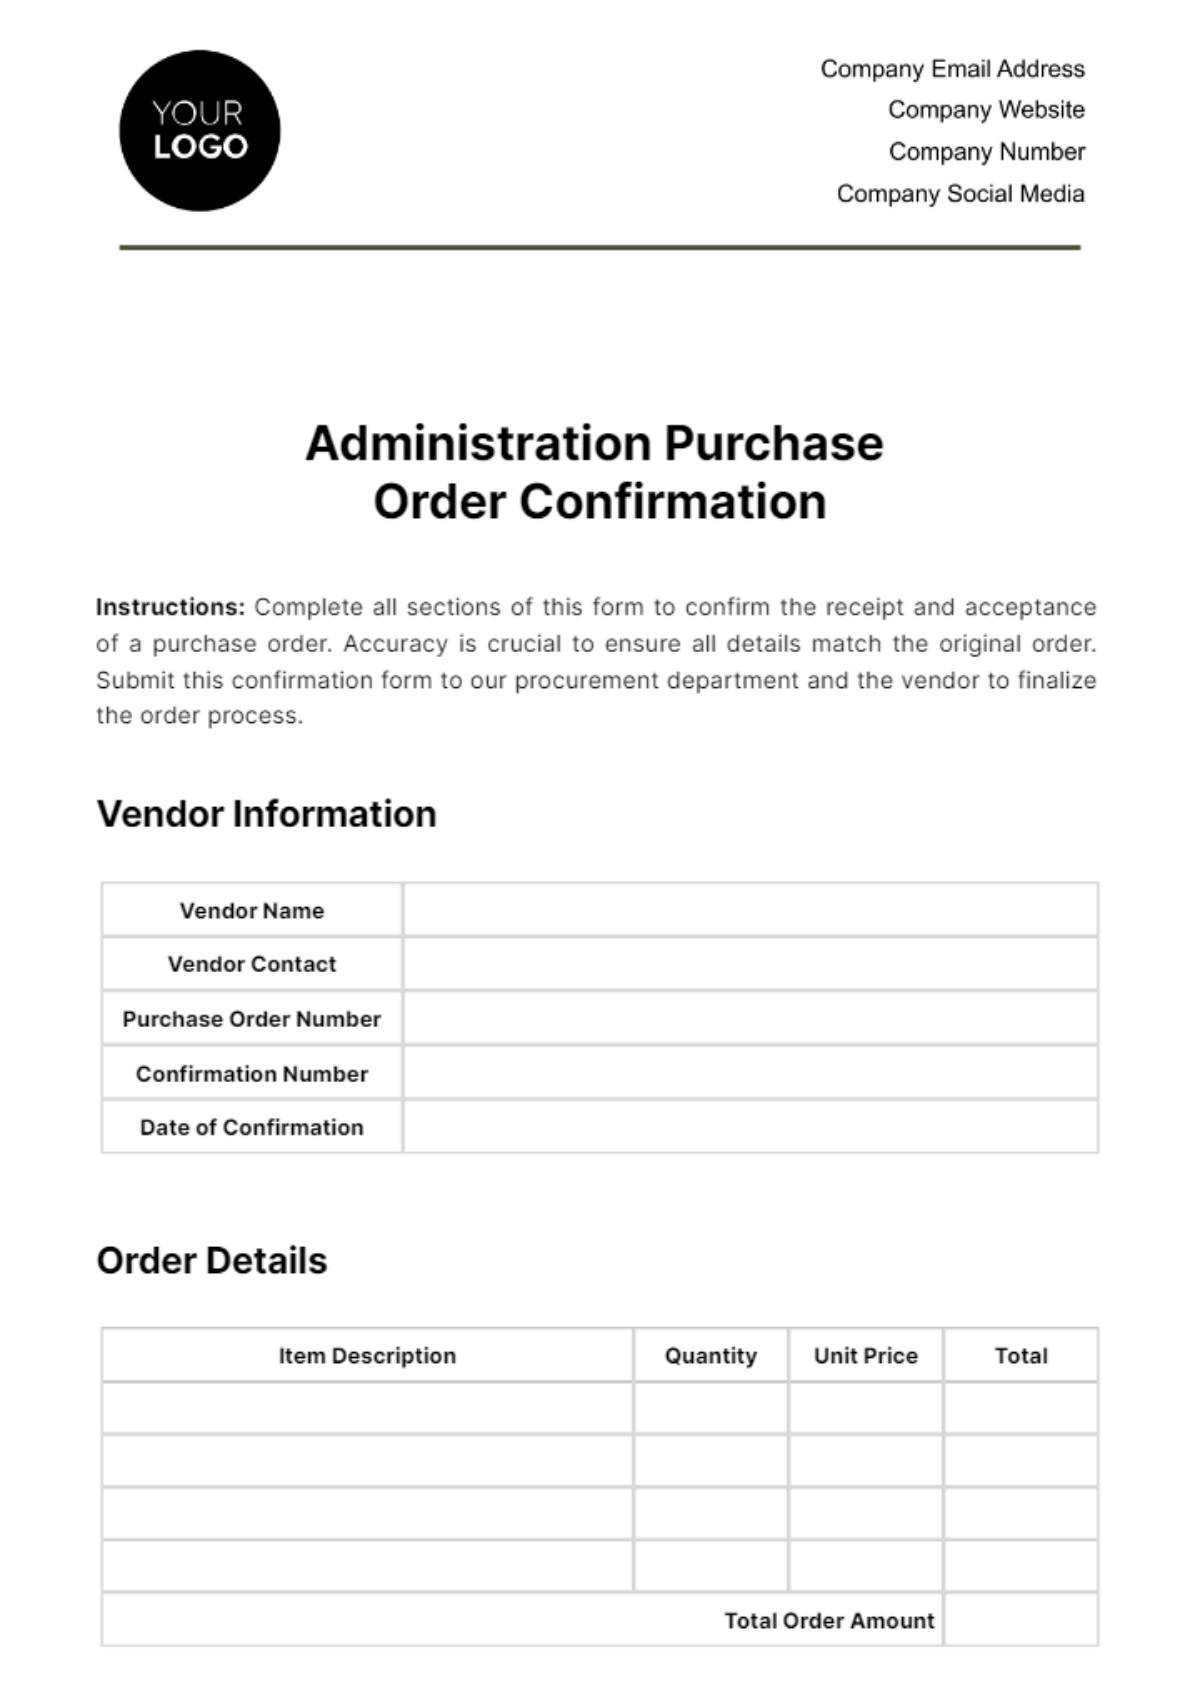 Free Administration Purchase Order Confirmation Template